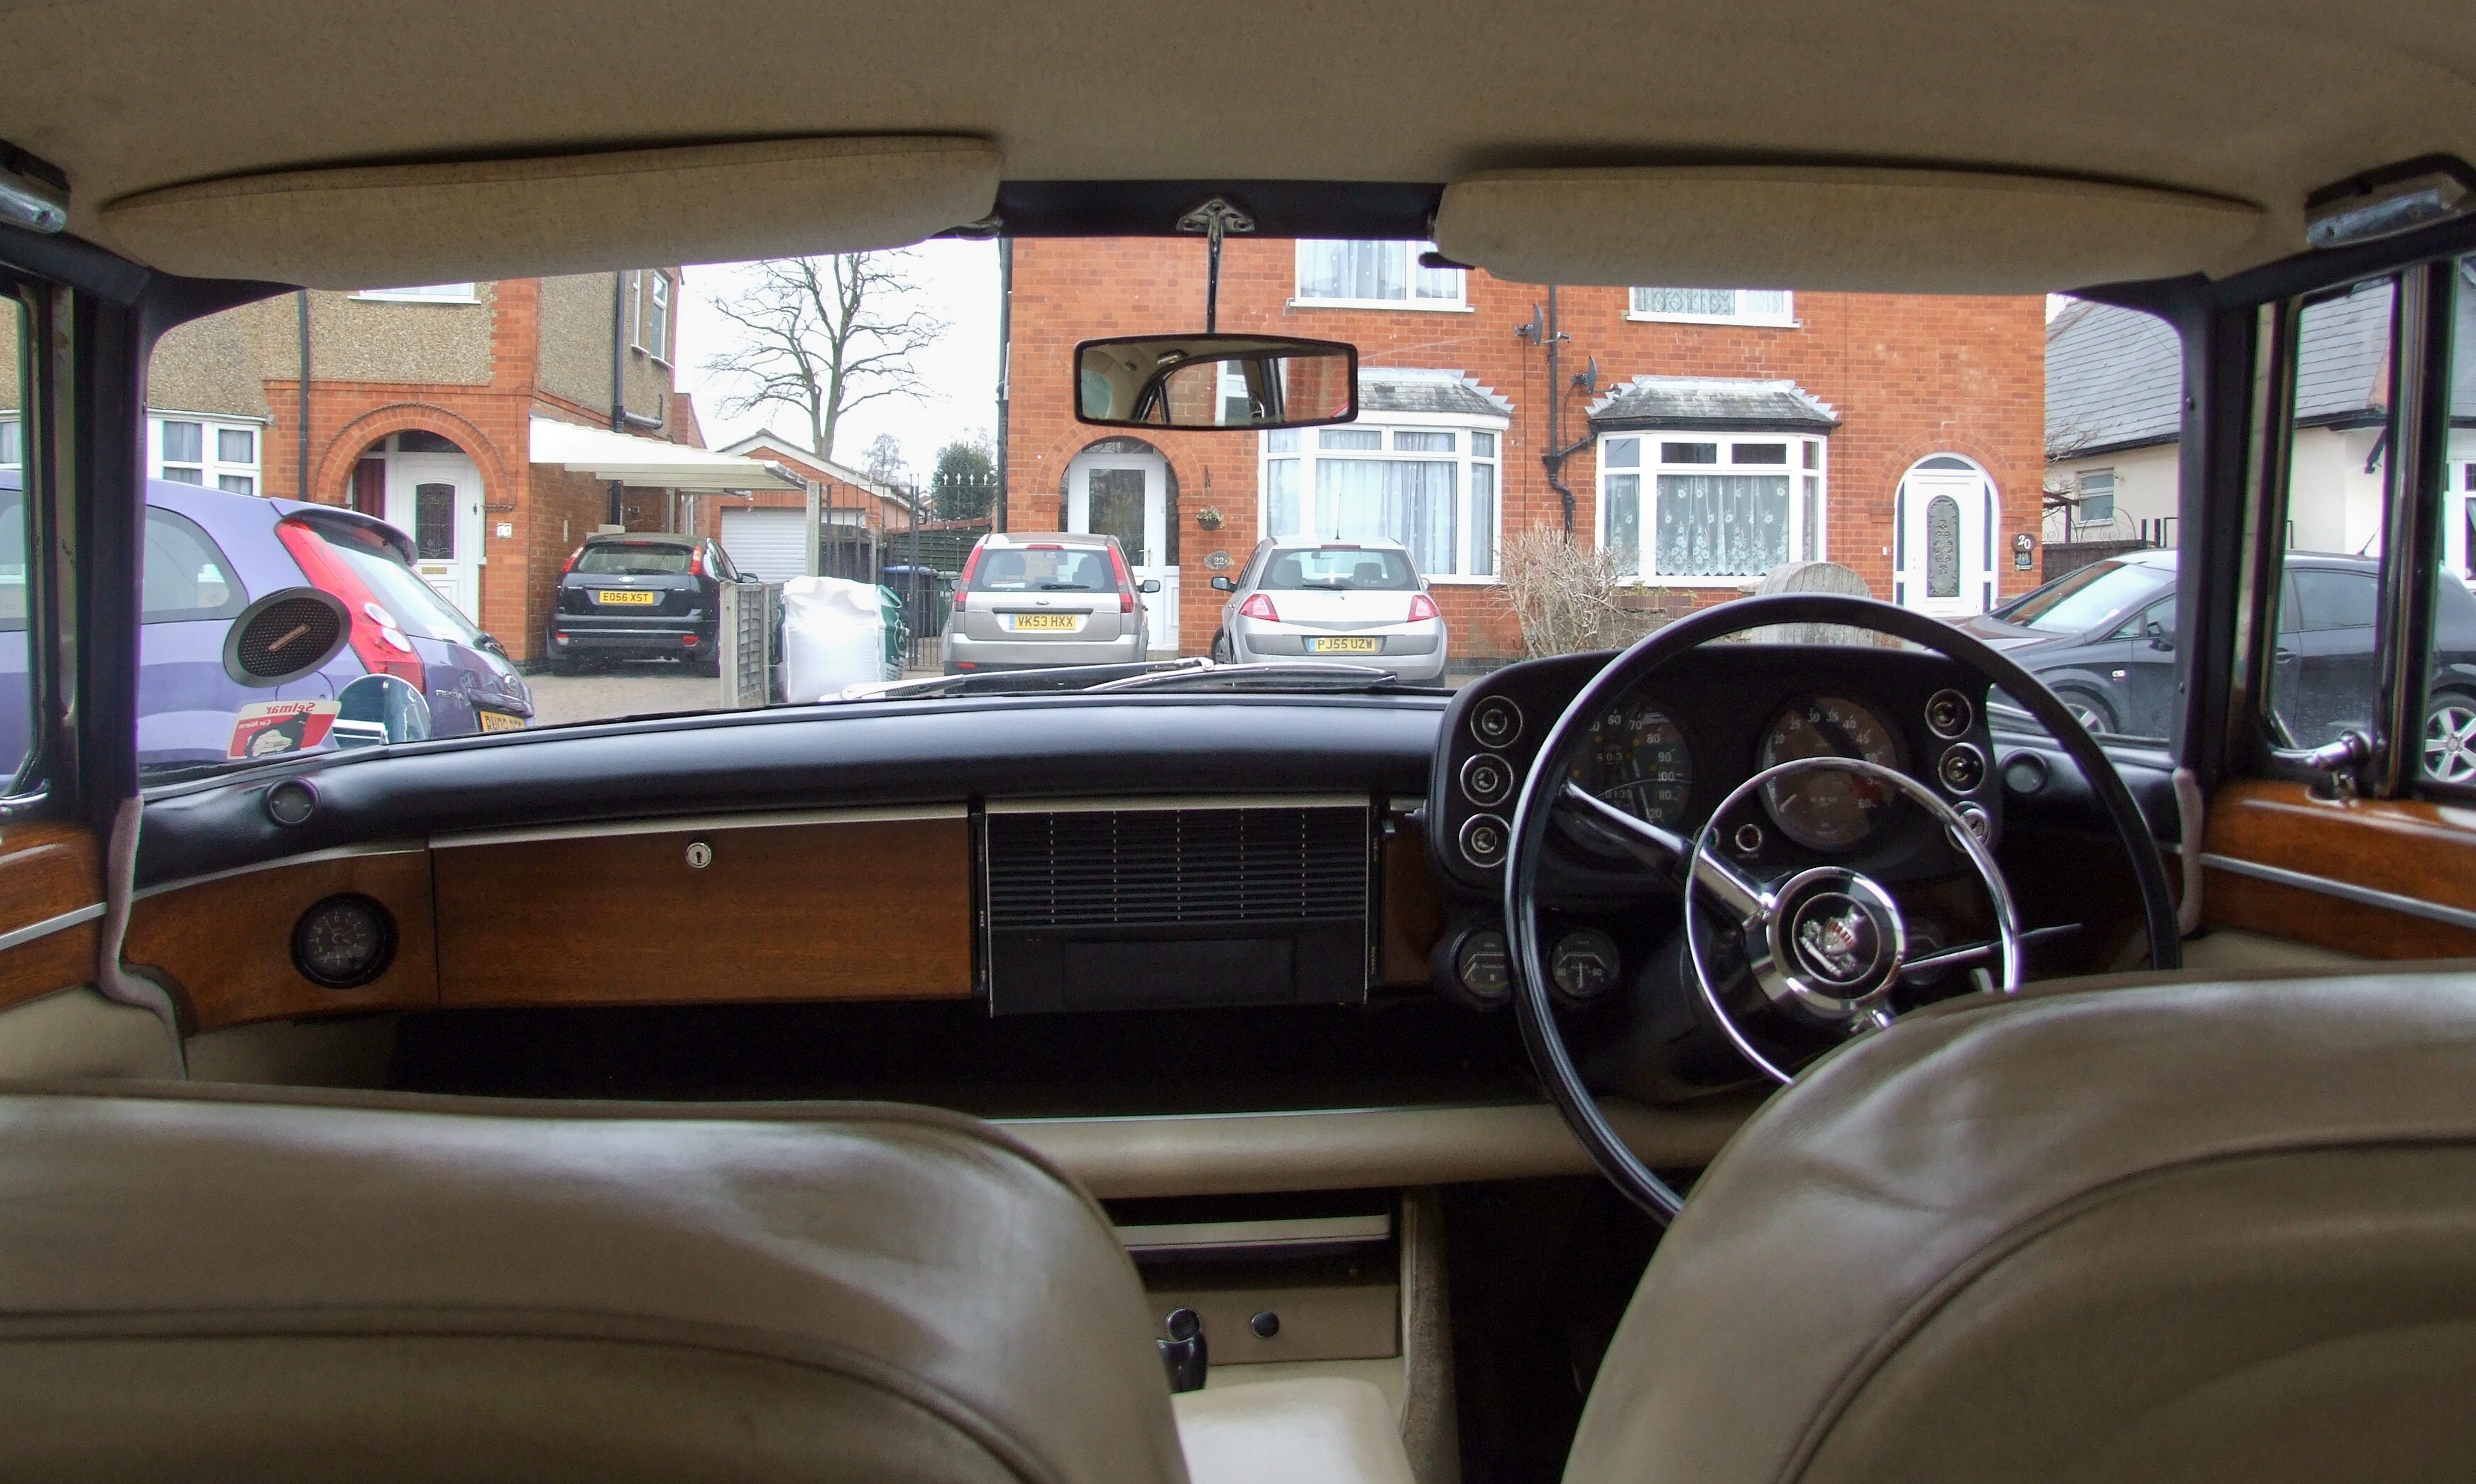 Show us your interior! - Page 4 - Readers' Cars - PistonHeads